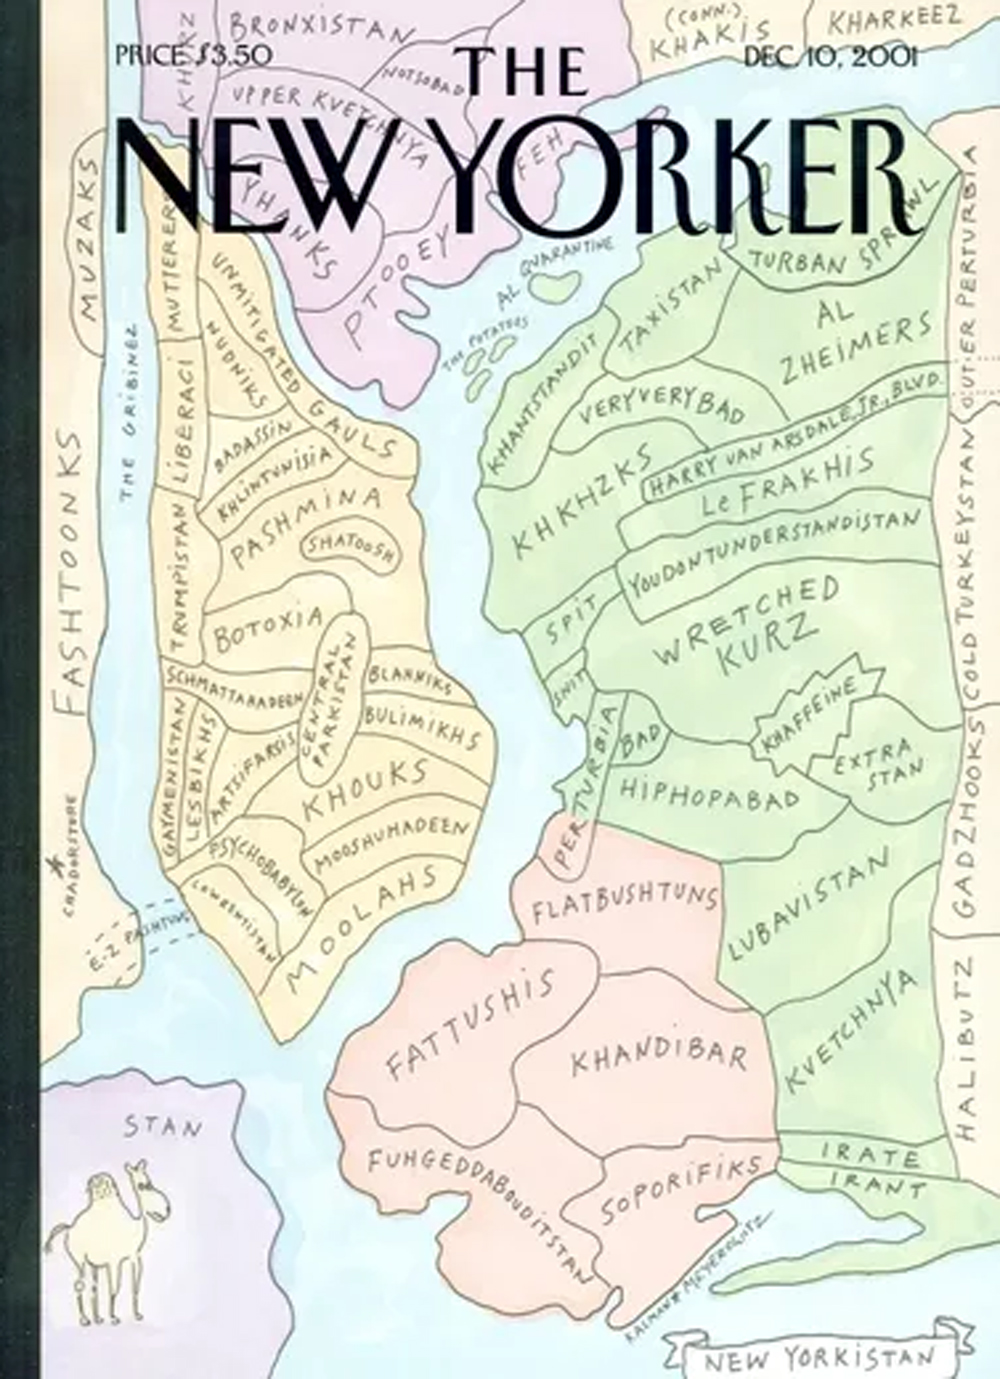 The New Yorker, December 10, 2001, A Park Avenue Makeover